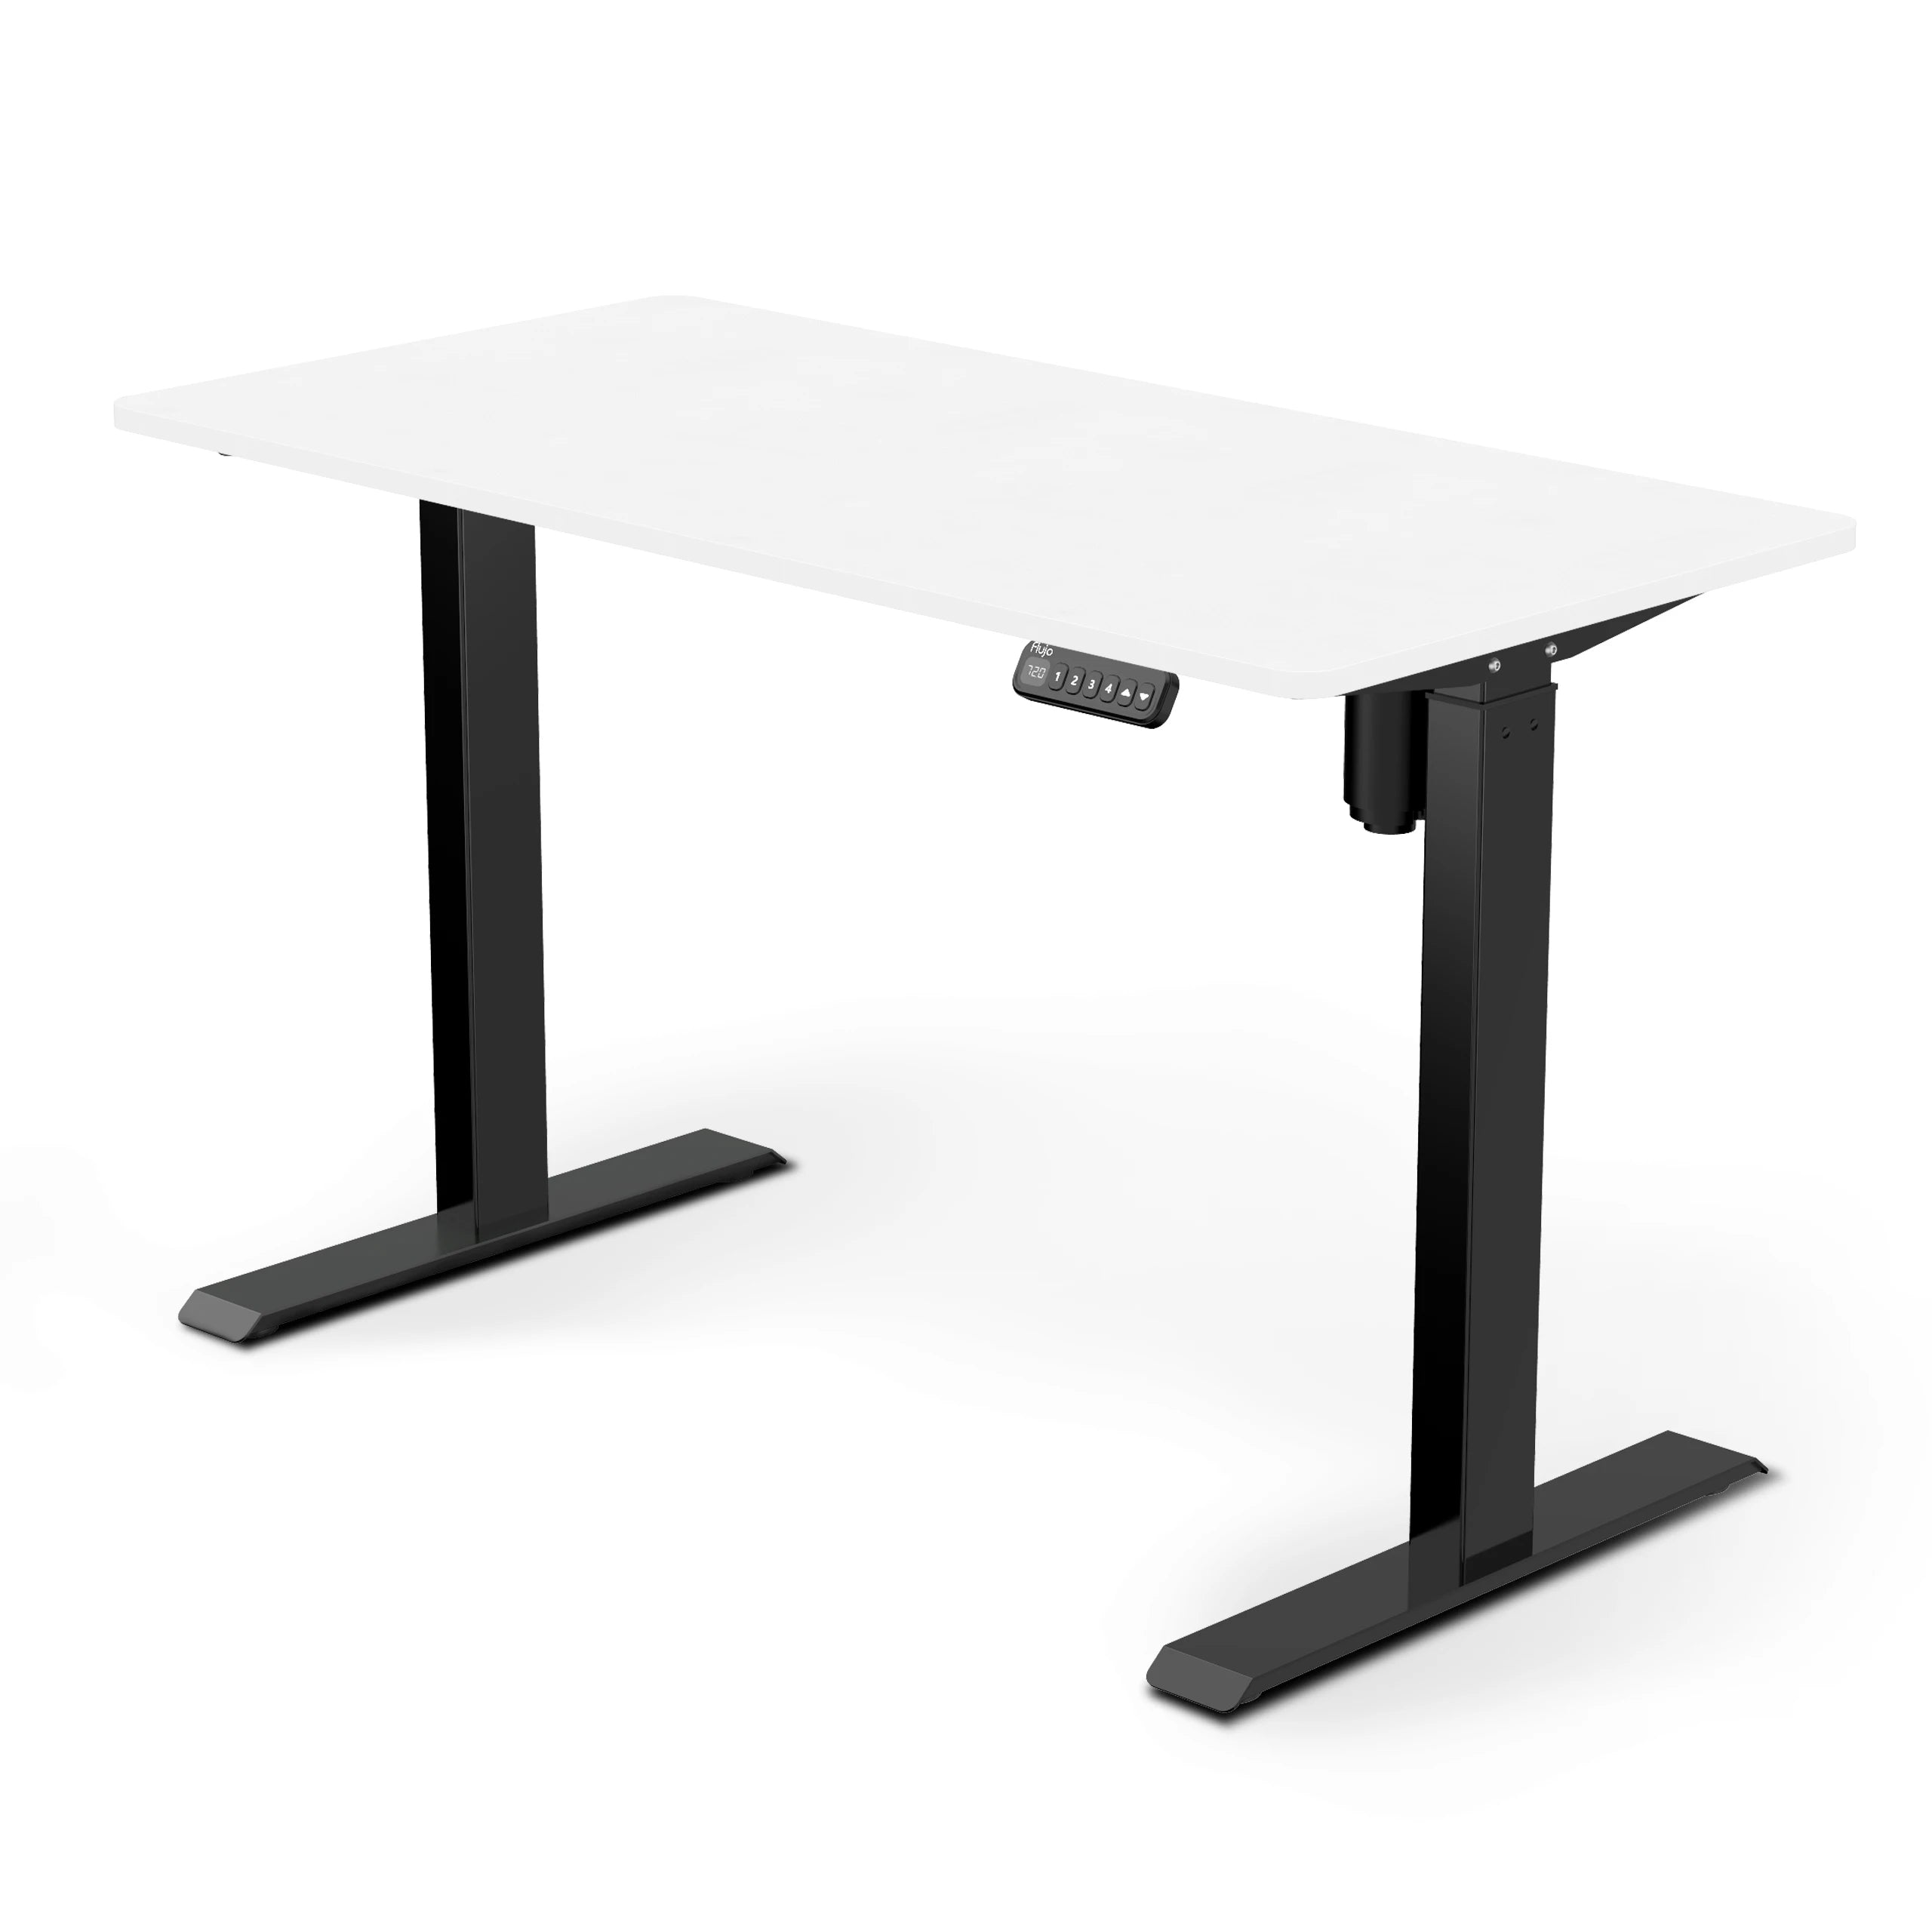 SmarTrax Ergonomic Standing Desk featuring a Warm White wood finish and black frame, complete with programmable height settings for a comfortable standing work experience.